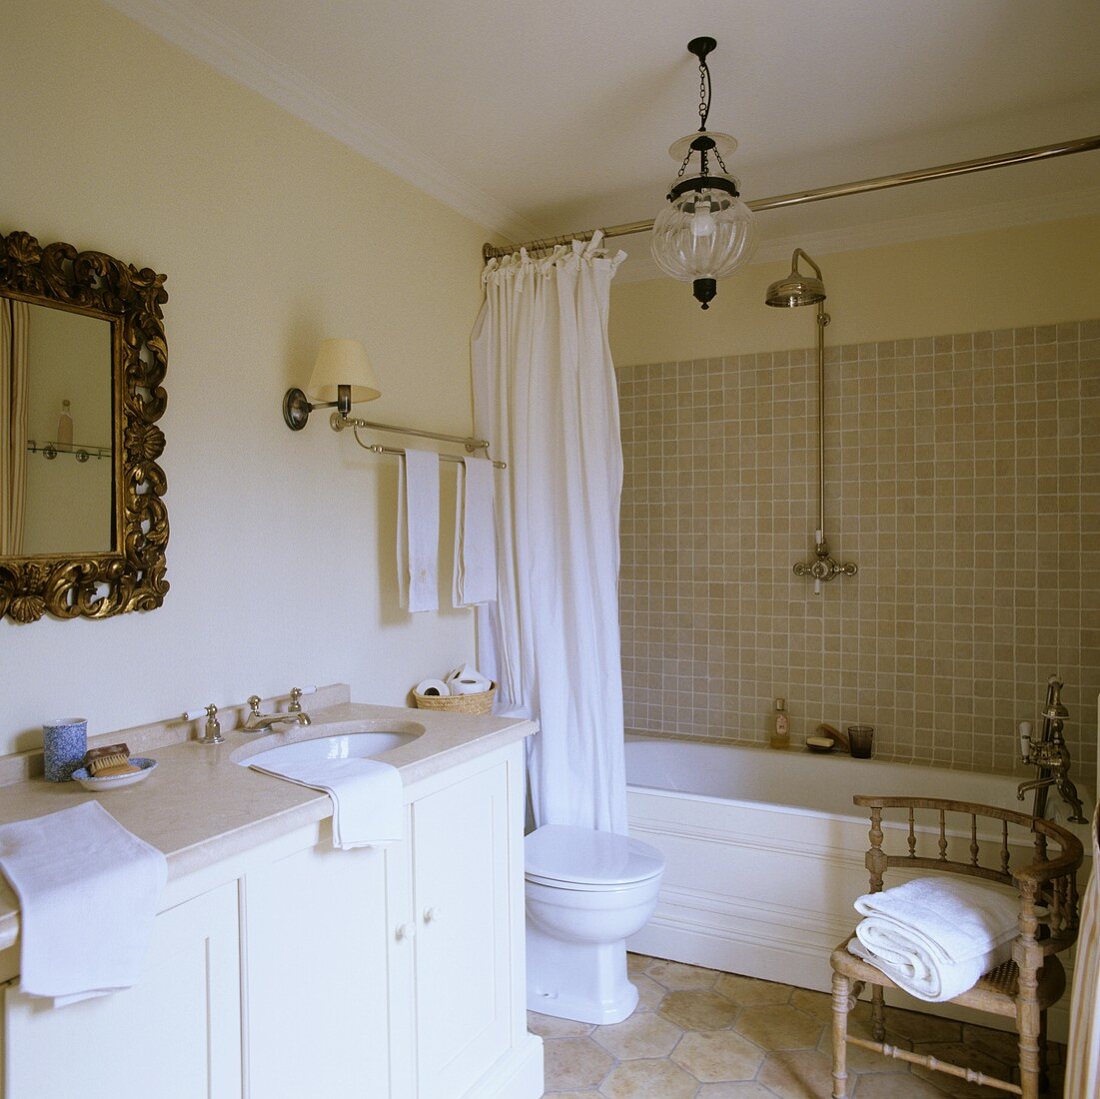 A bathroom in a country house with a marble-topped washstand an antique accessories